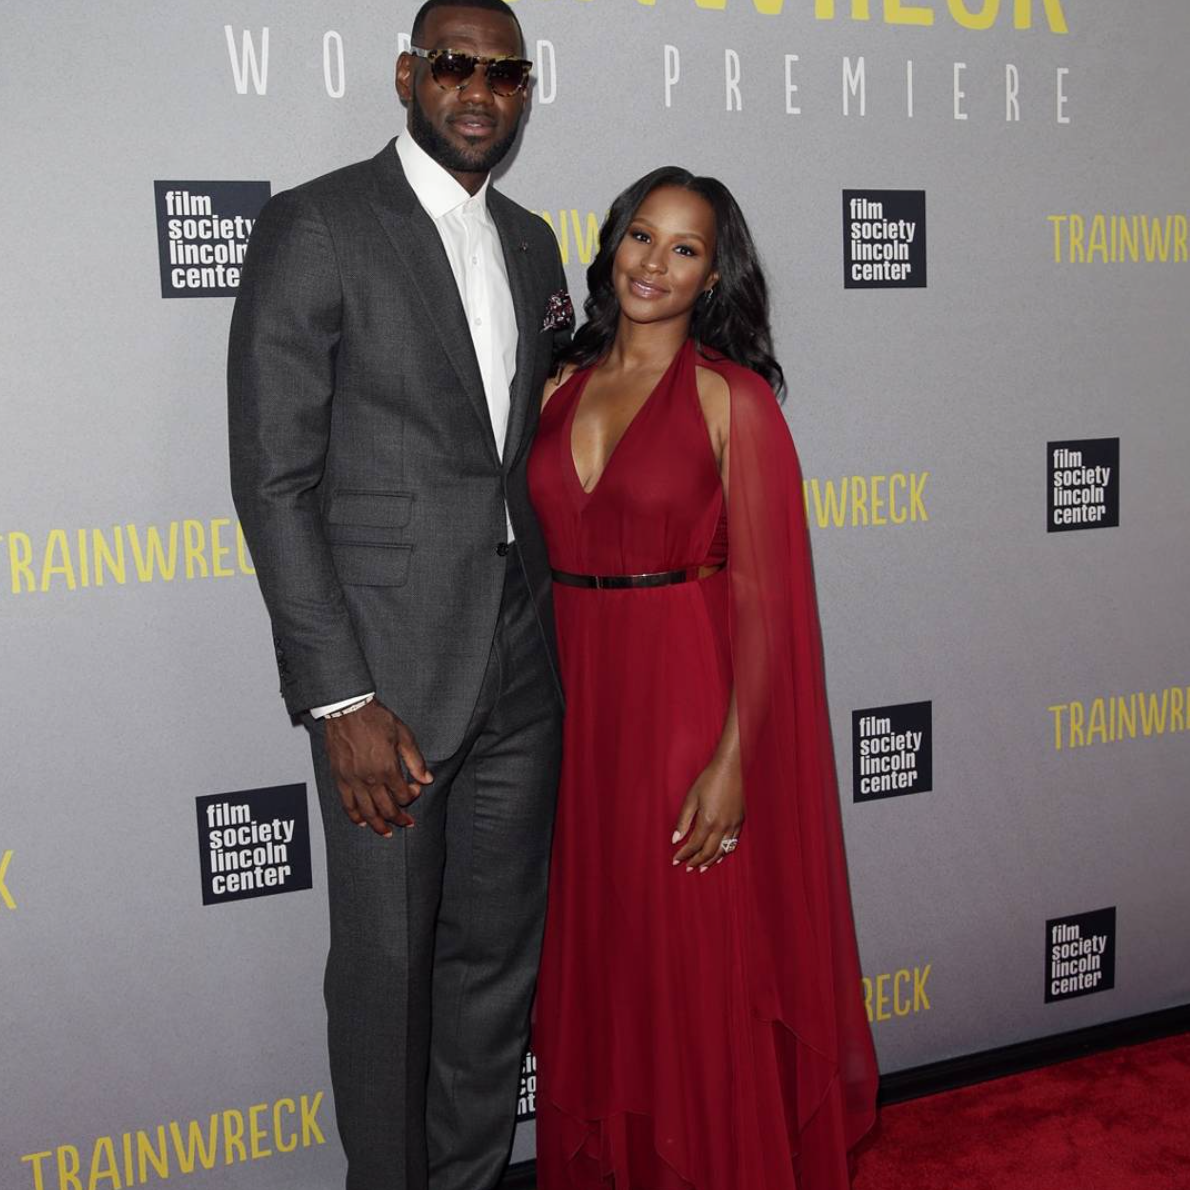 LeBron James Just Posted The Sweetest Message To Wife Savannah On Their Anniversary
